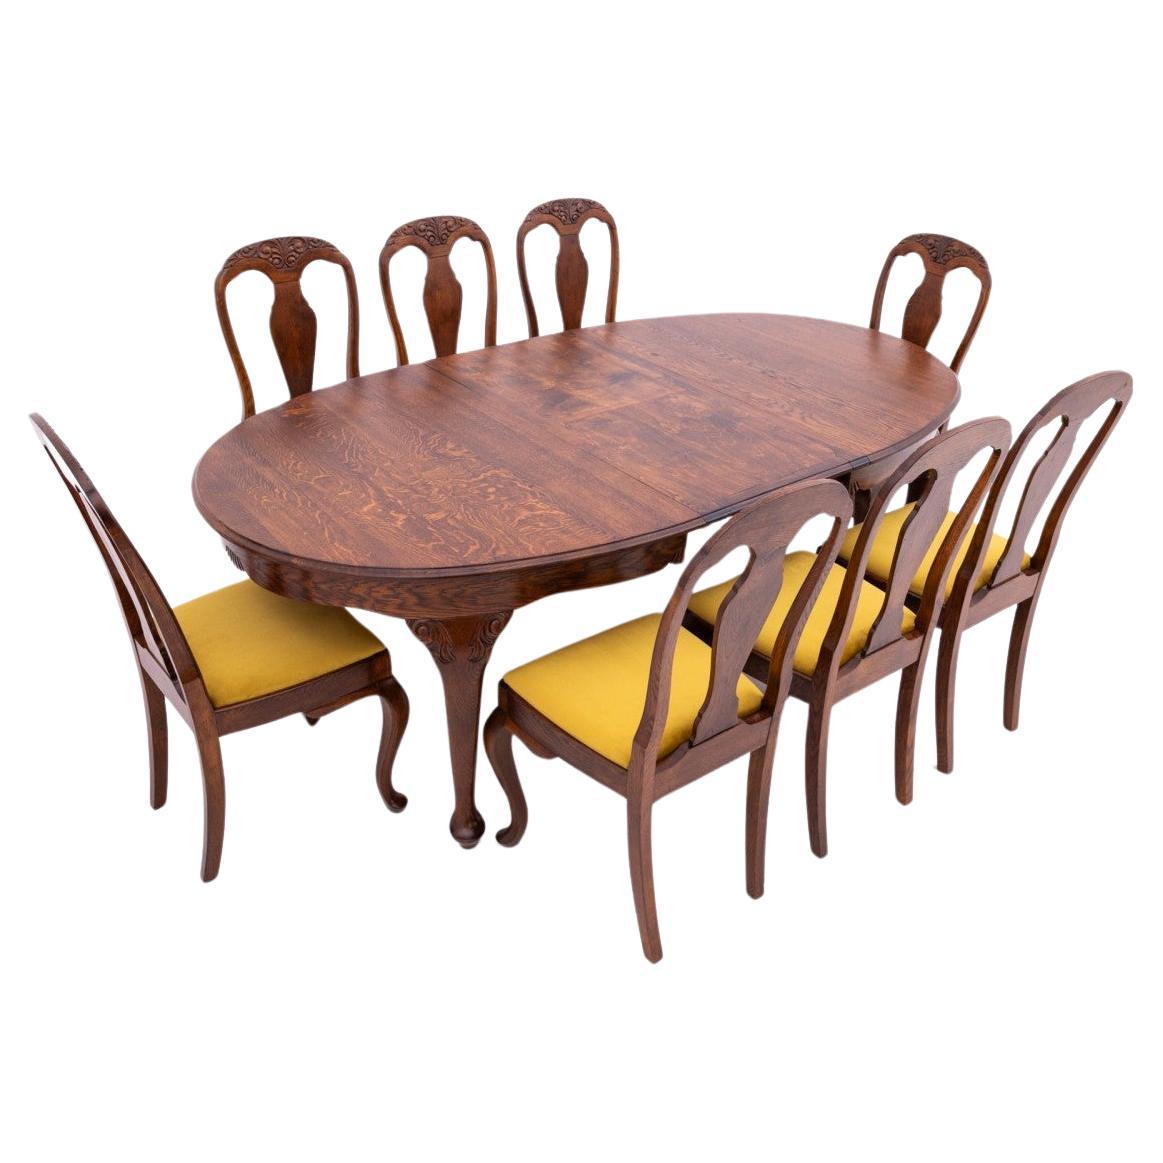 Antique table + 8 chairs, Northern Europe, circa 1920. AFTER RENOVATION